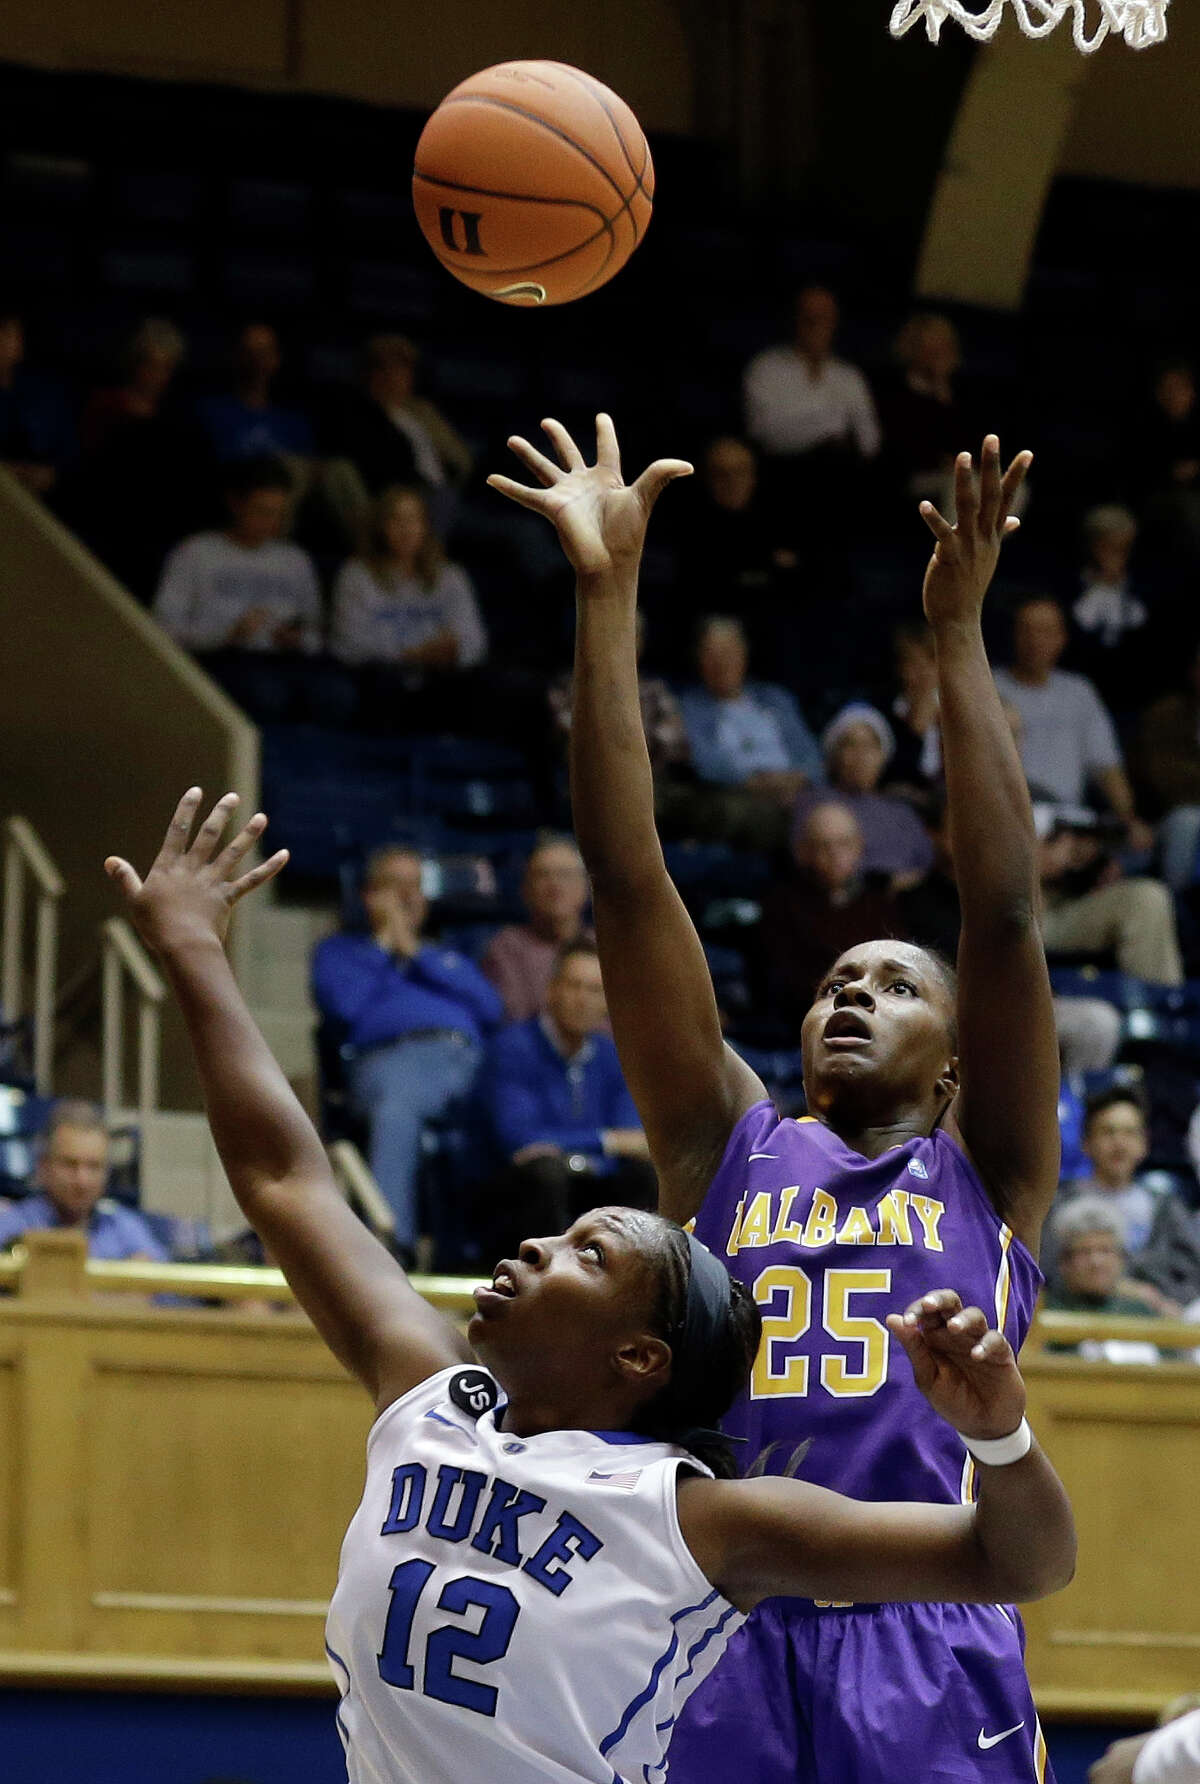 Duke's Chelsea Gray (12) defends as Albany's Shereesha Richards (25) shoots during the second half of an NCAA college basketball game in Durham, N.C., Thursday, Dec. 19, 2013. Duke won 80-51. (AP Photo/Gerry Broome) ORG XMIT: NCGB106